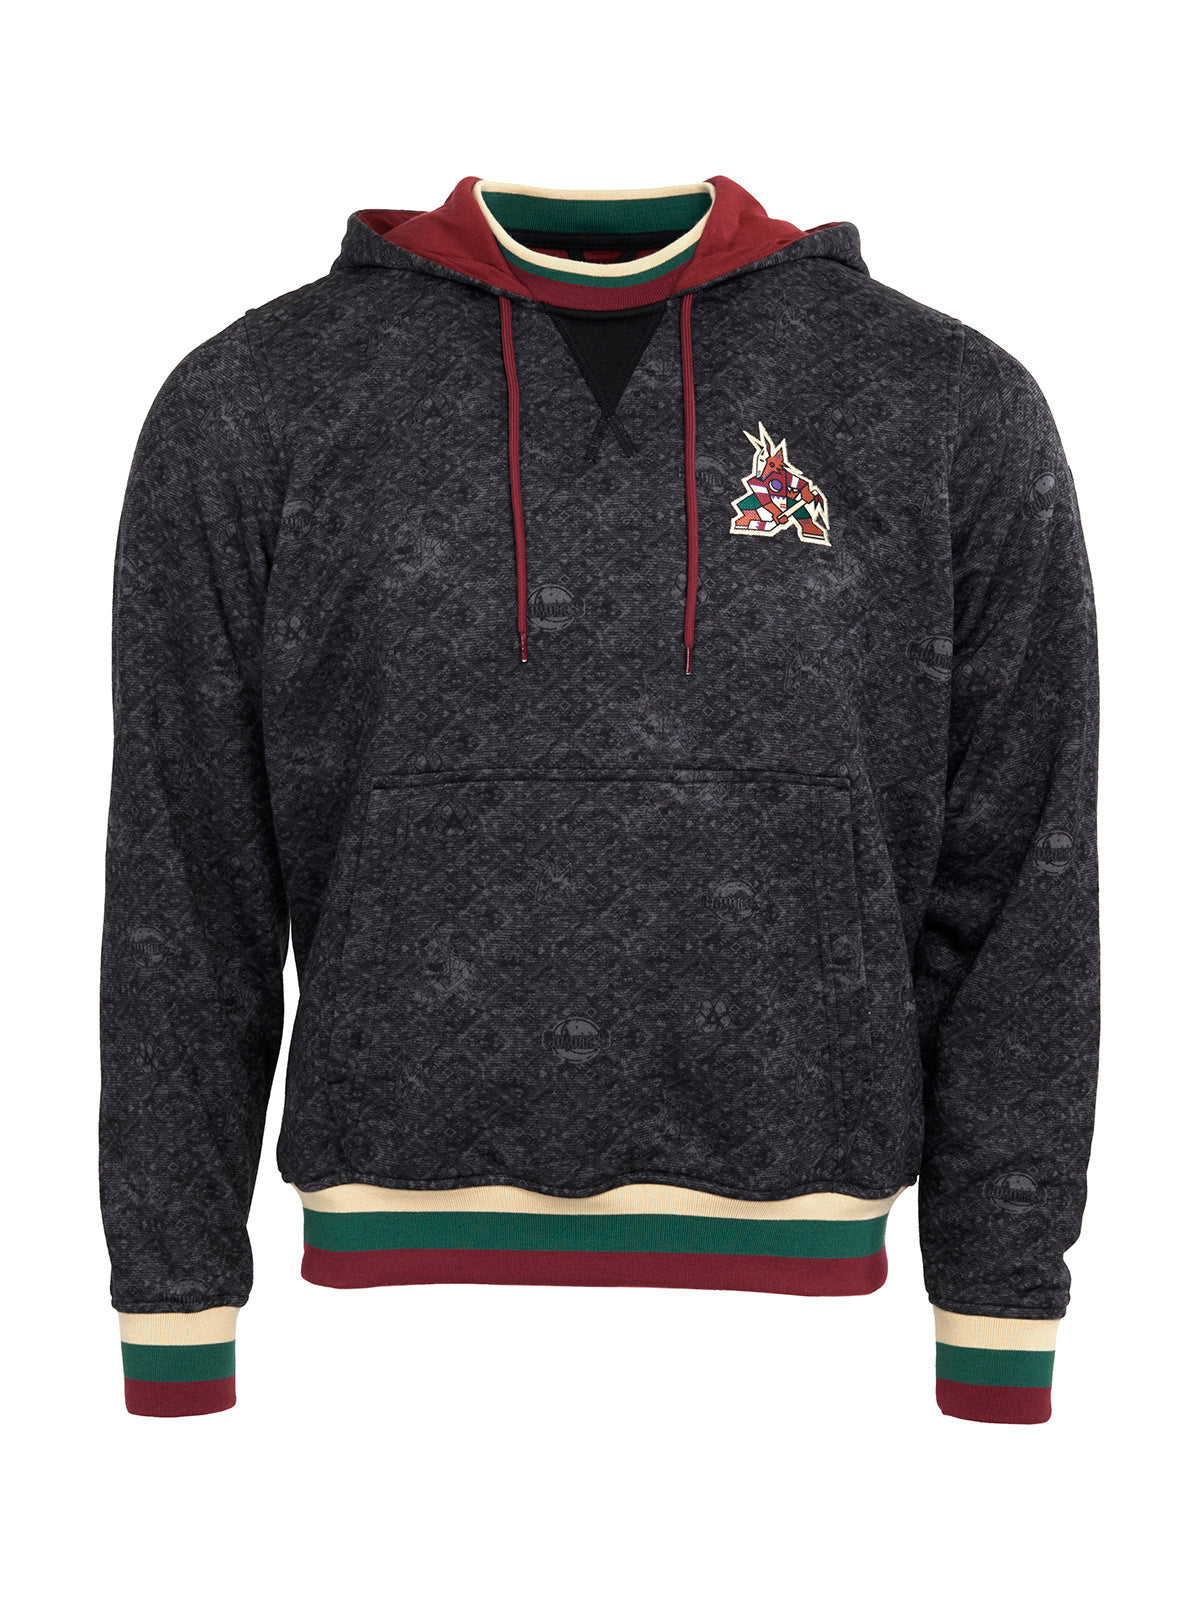 Arizona Coyotes Hoodie - Show your team spirit, with the iconic team logo patch on the front left chest, and proudly display your Arizona Coyotes support in their team colors with this NHL hockey hoodie.